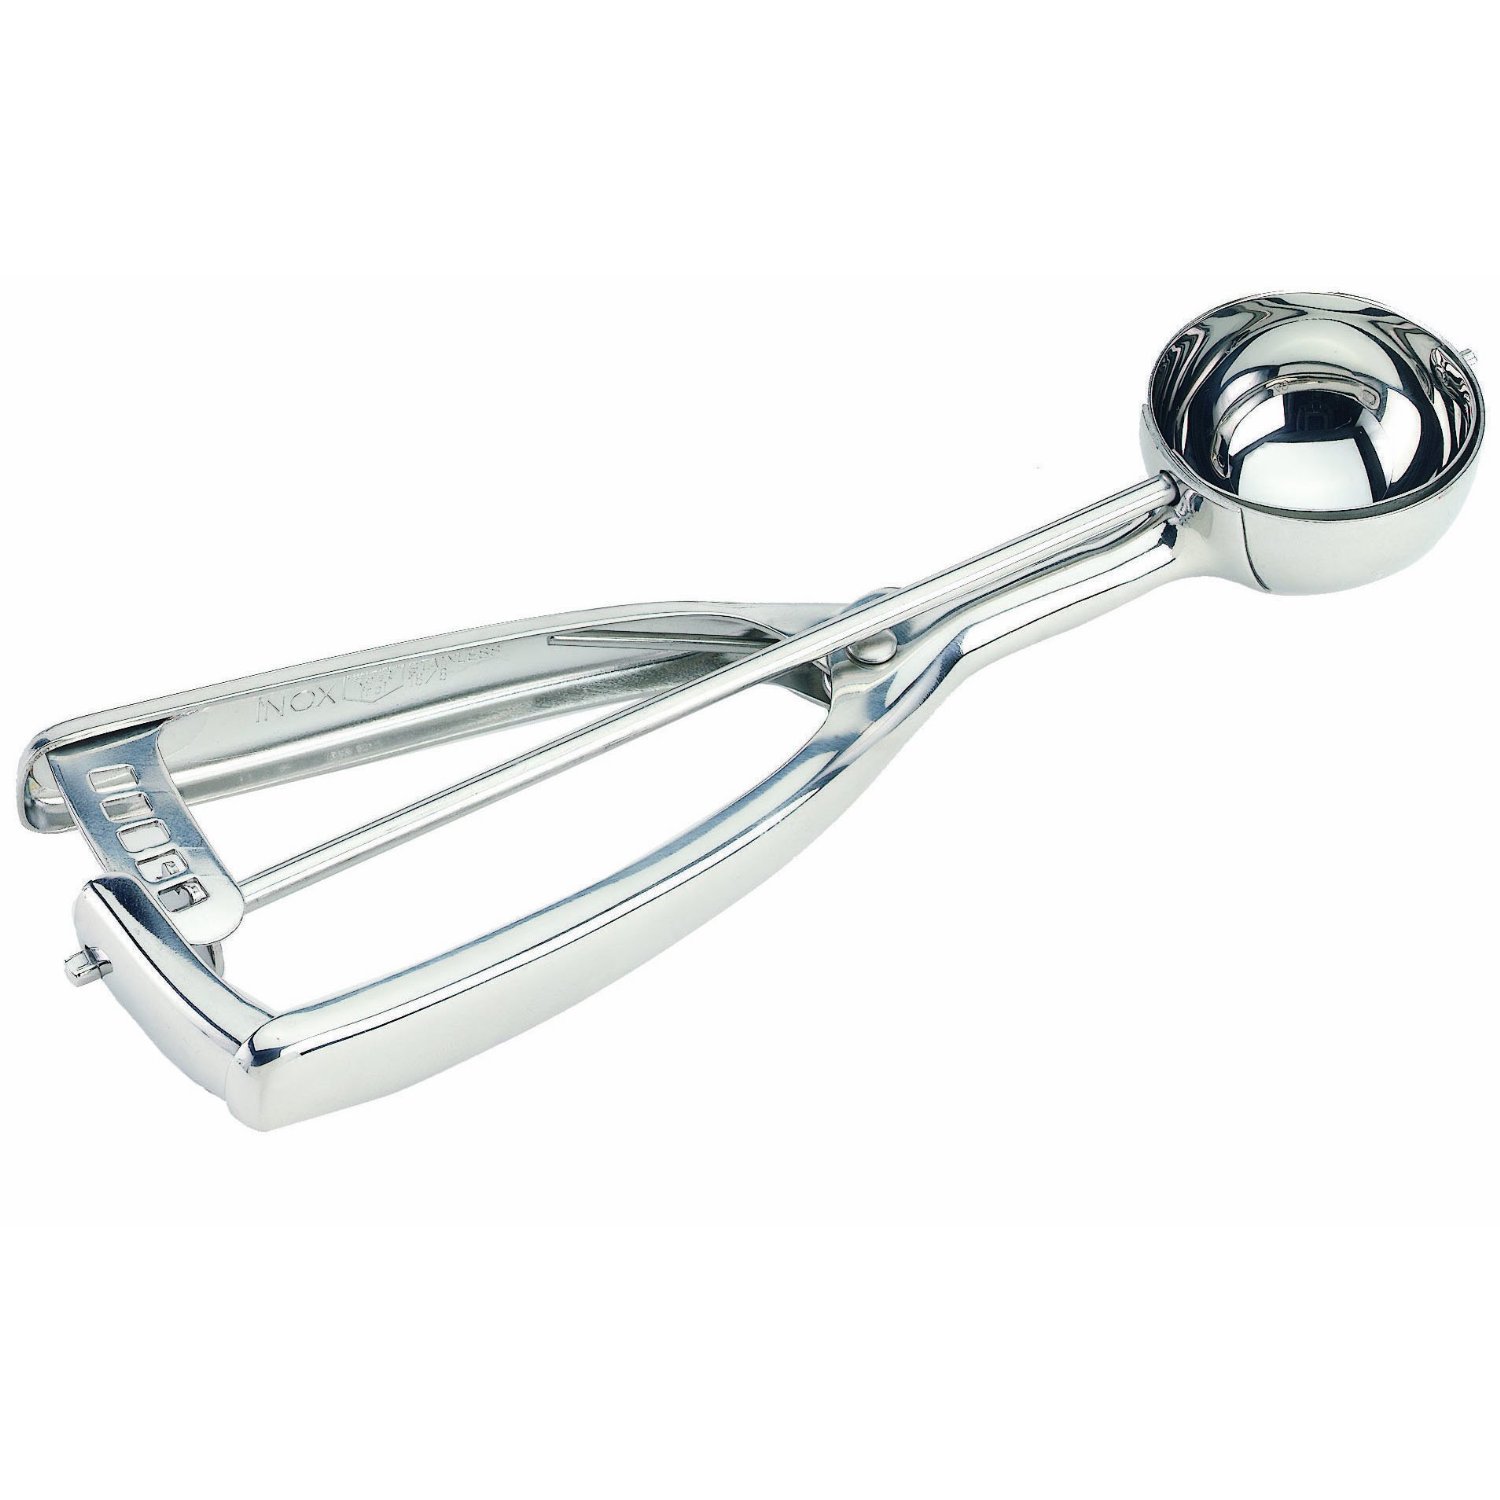 Dss20 Stainless Steel Portion Scoop - 2.5 Oz.